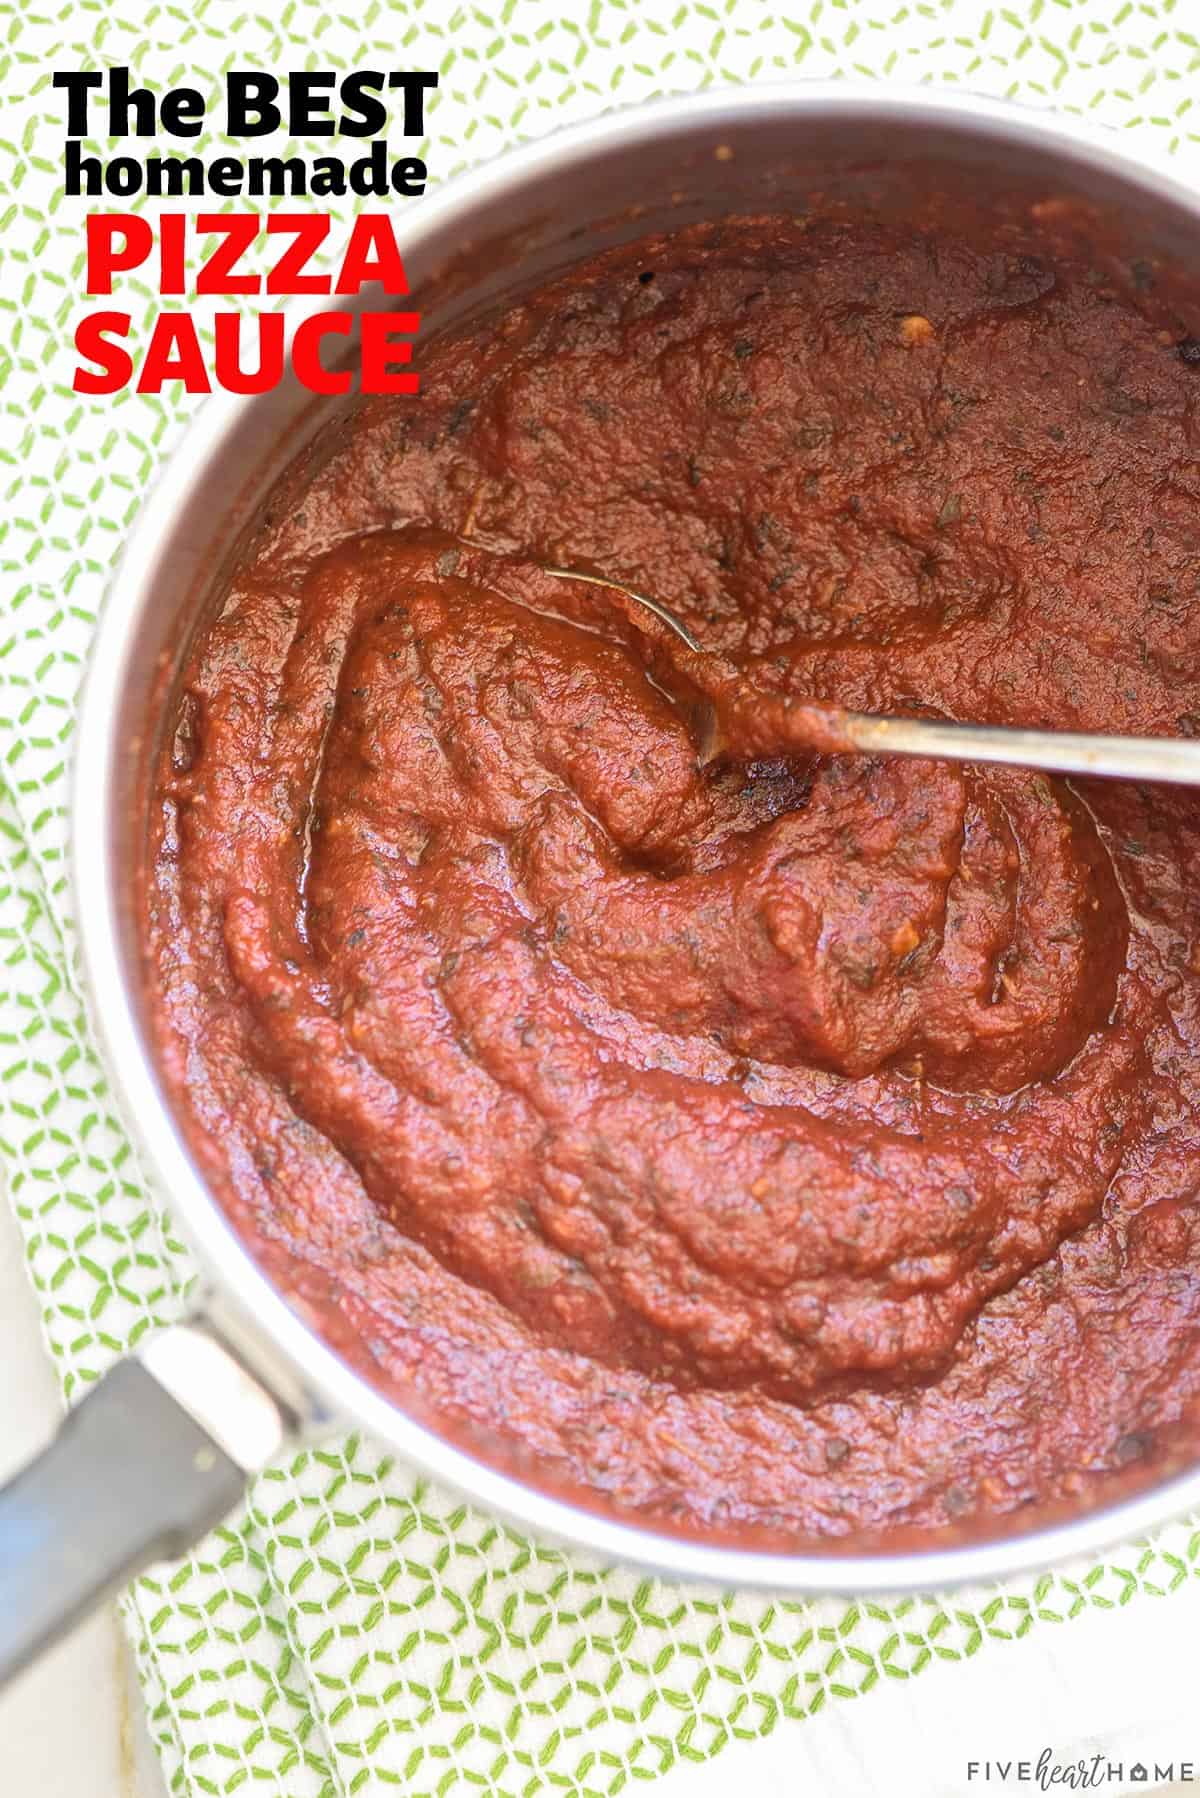 The BEST Pizza Sauce with text overlay.